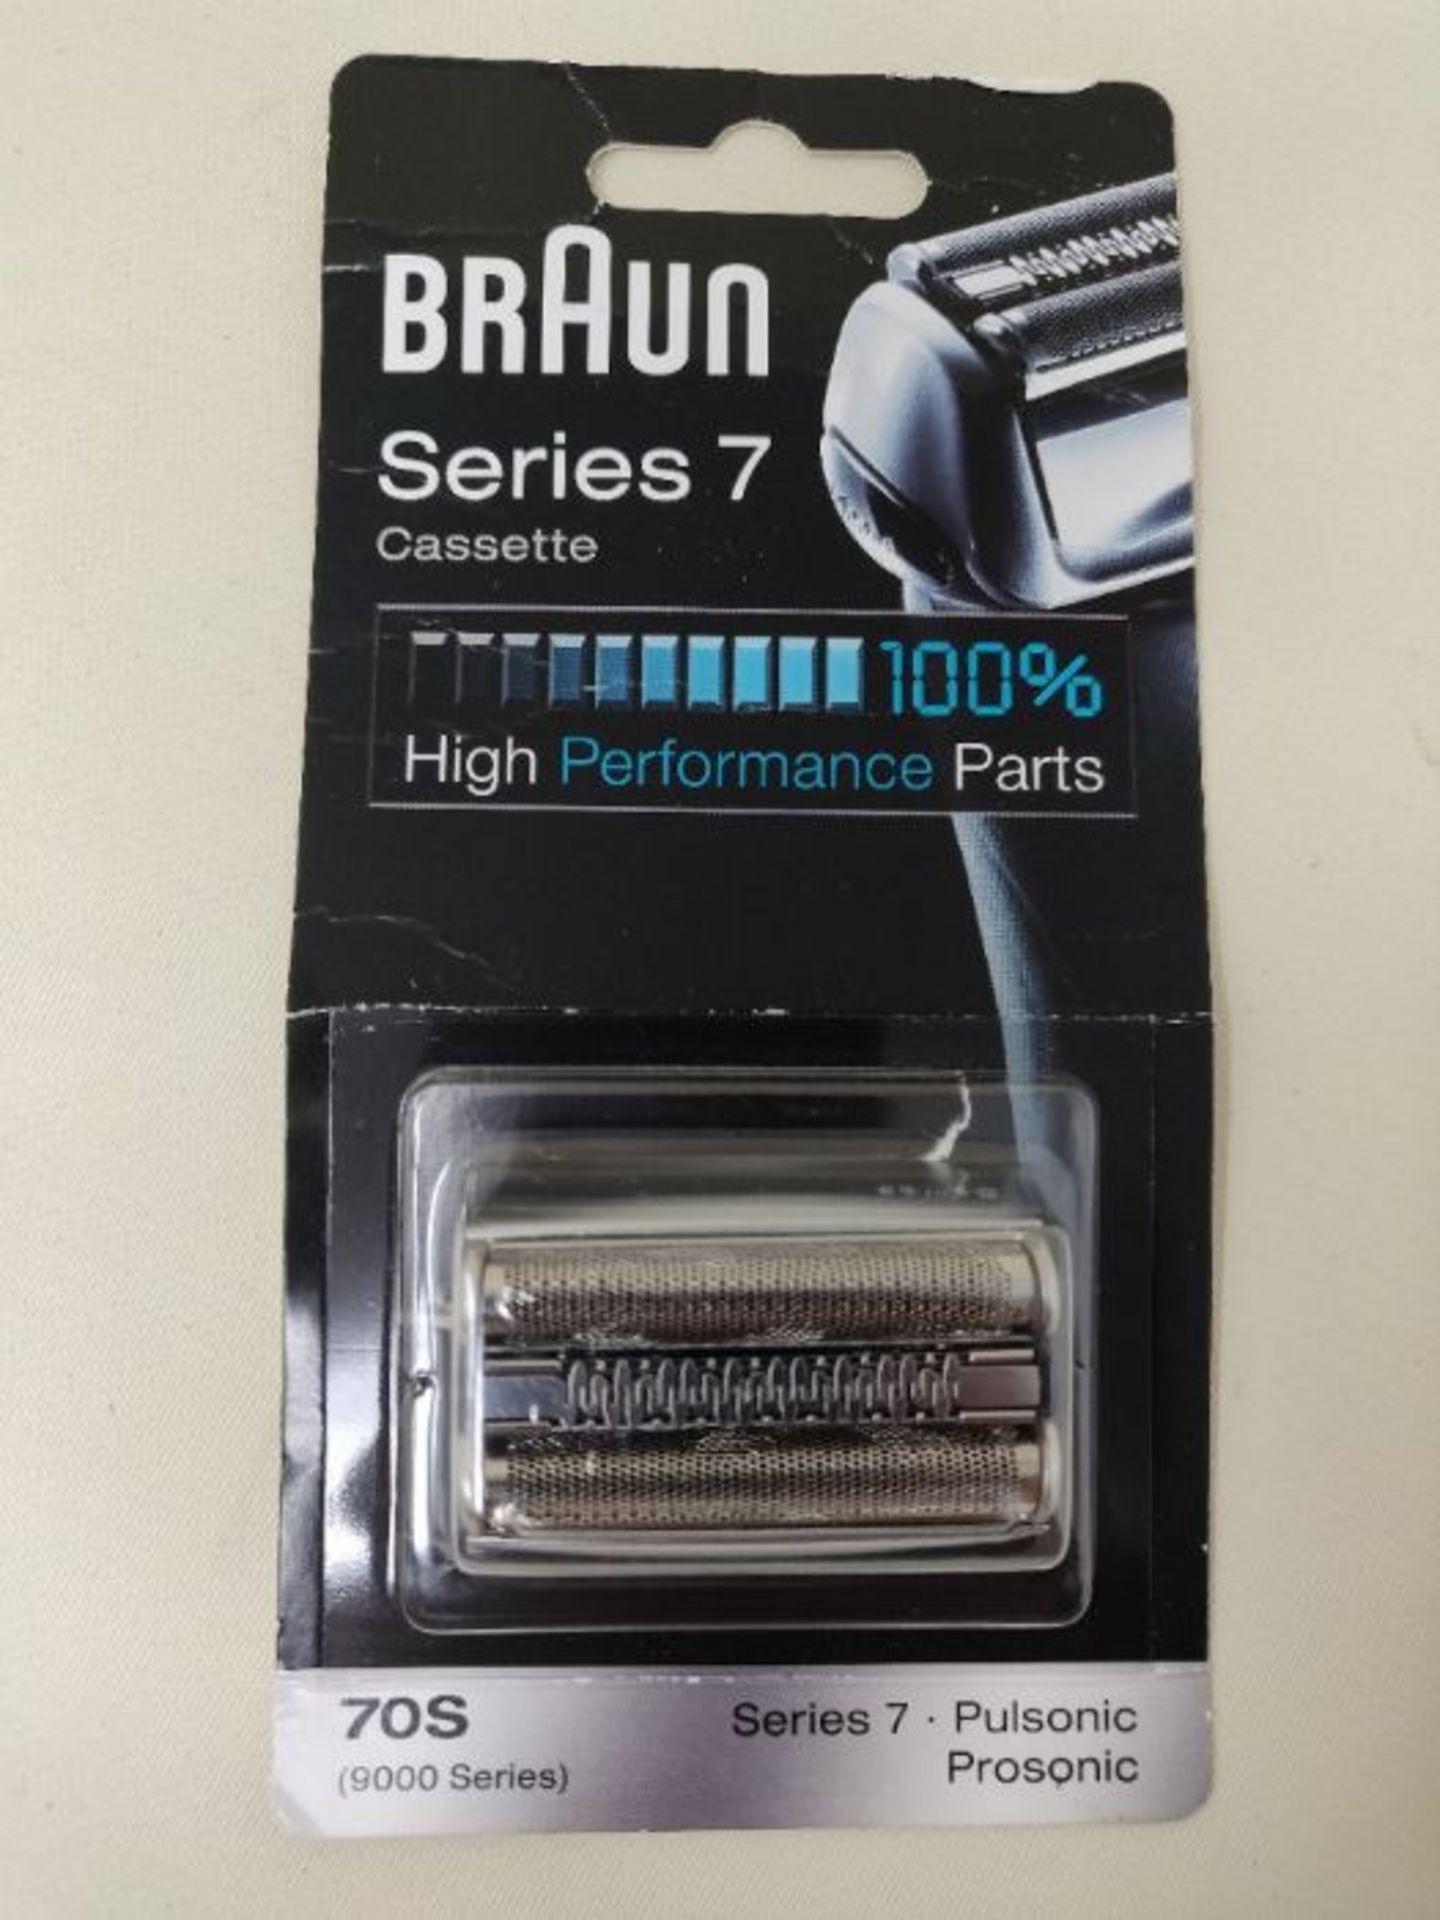 Braun Shaver Replacement Part 70S Silver, Compatible with Series 7 Shavers - Image 2 of 2